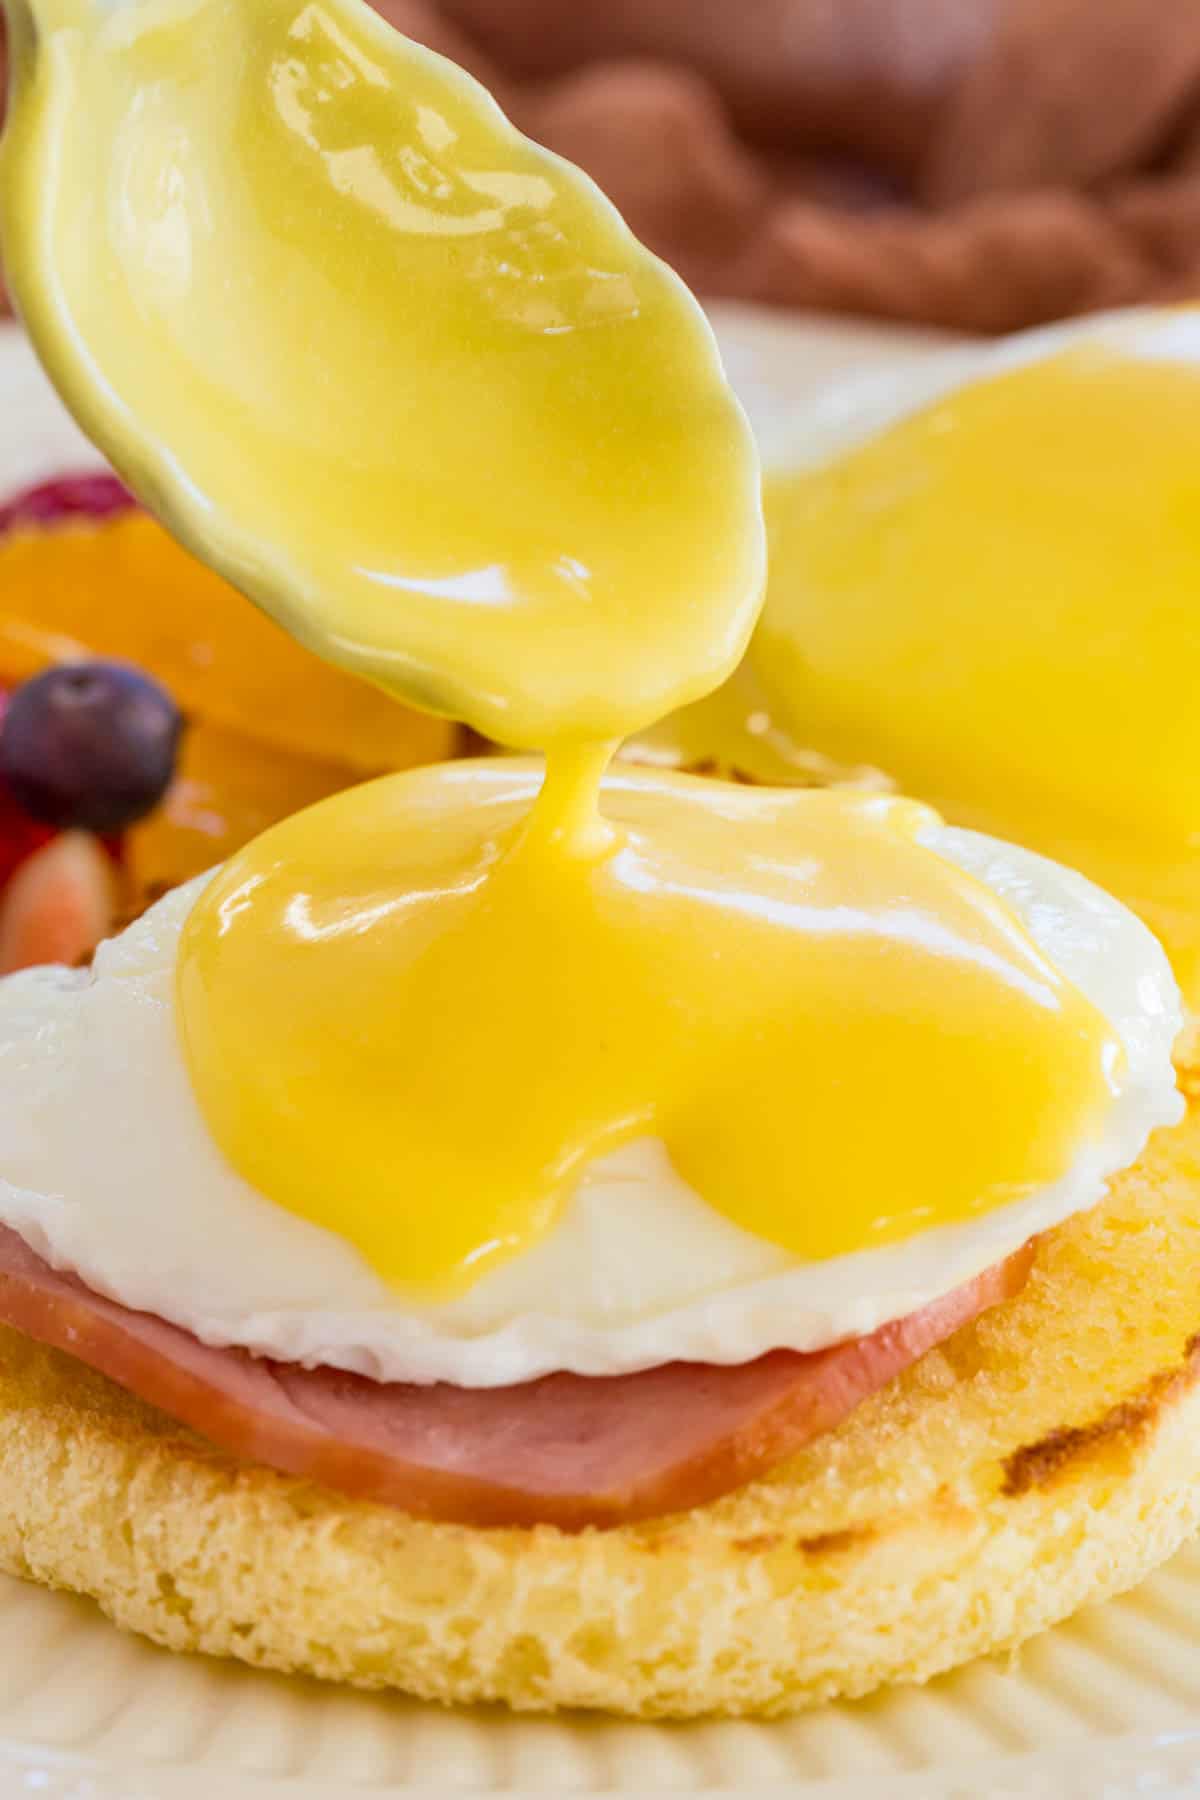 A spoonful of hollandaise sauce is dropped onto the poached egg of an Eggs Benedict stack.